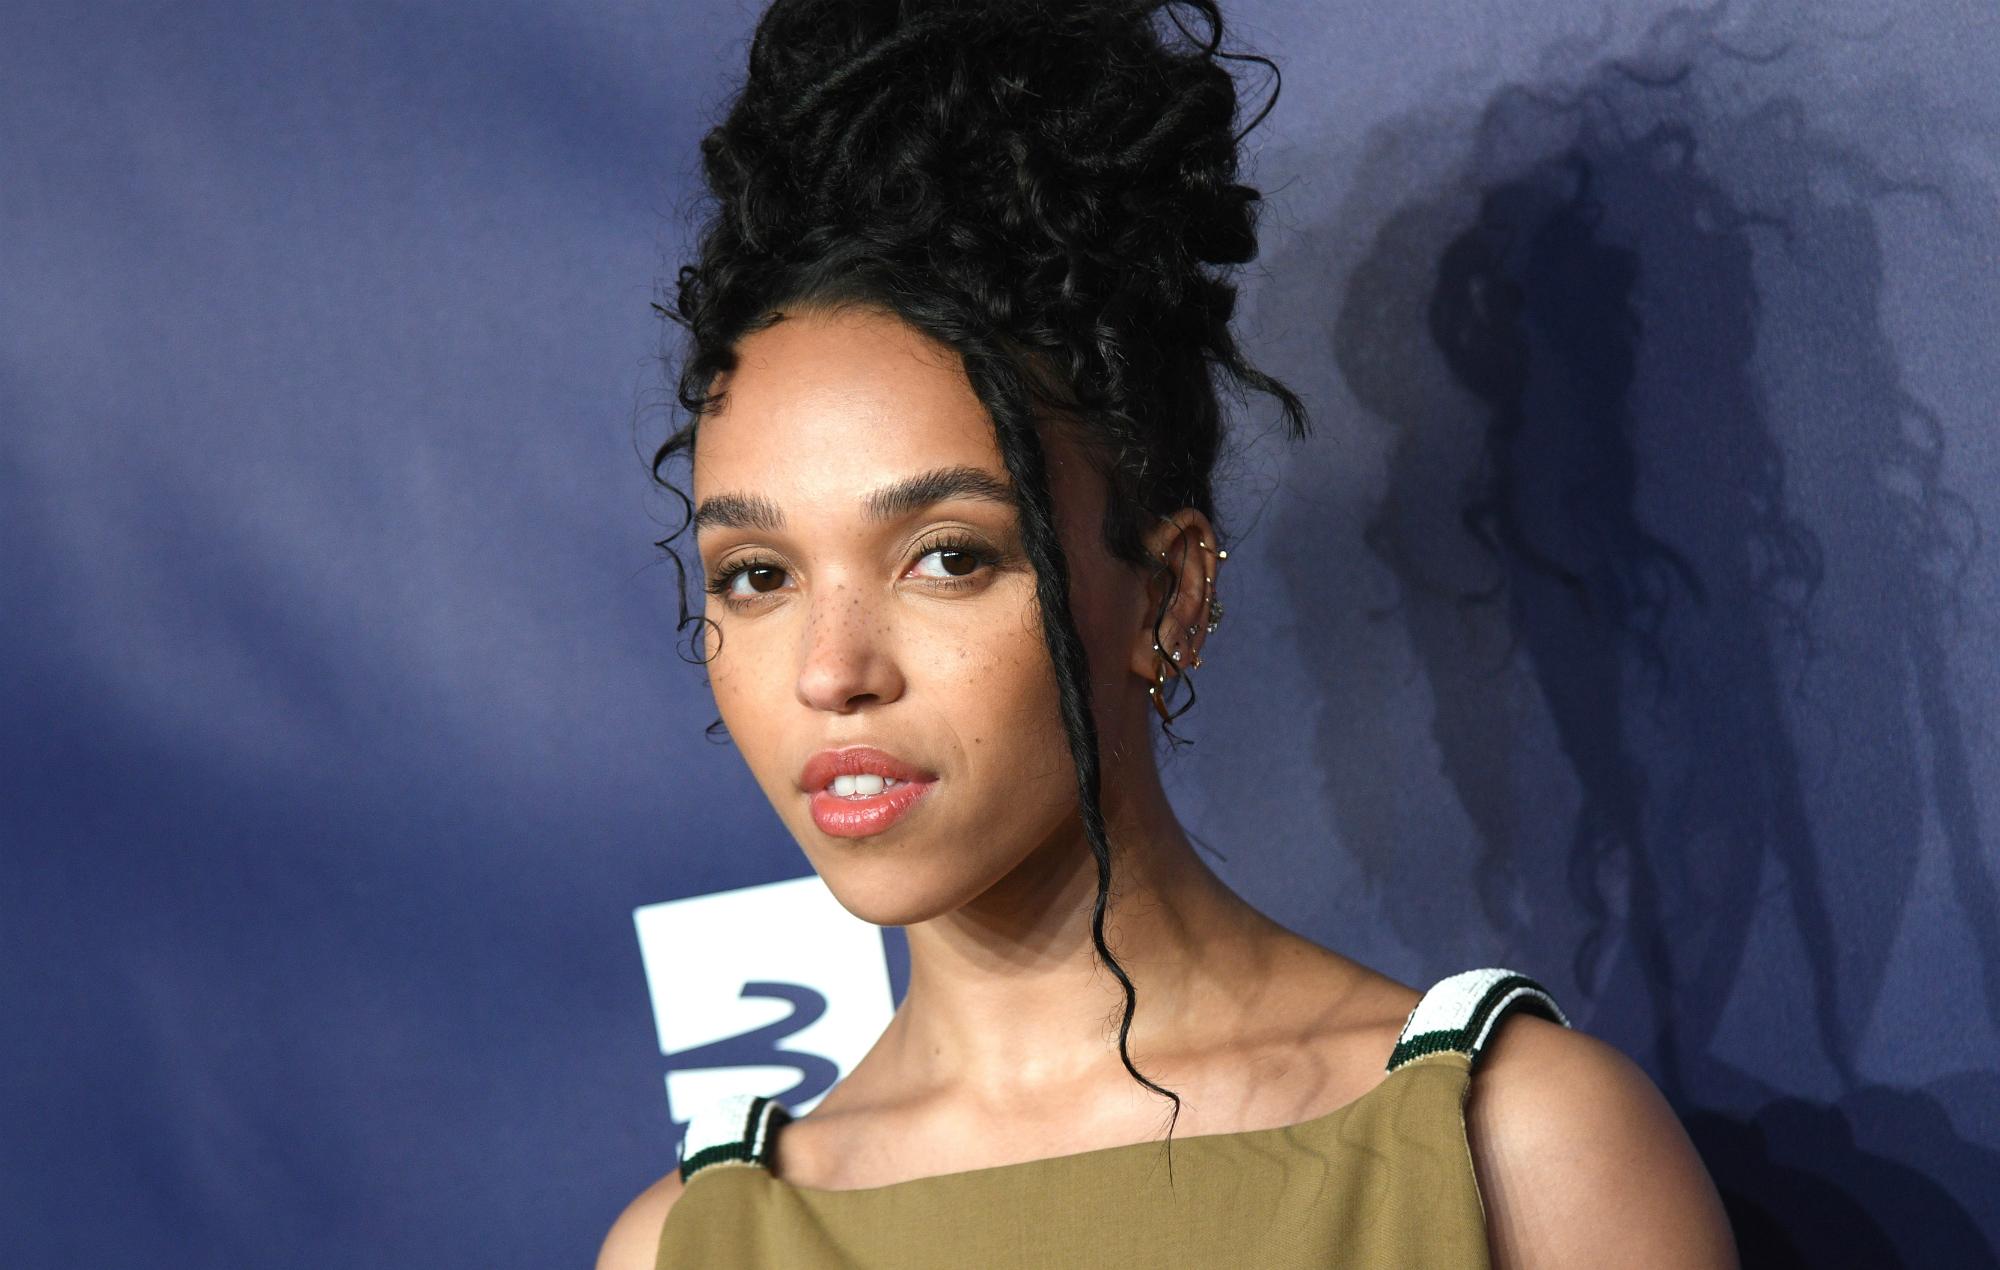 FKA twigs set to release comeback single 'Cellophane' this week